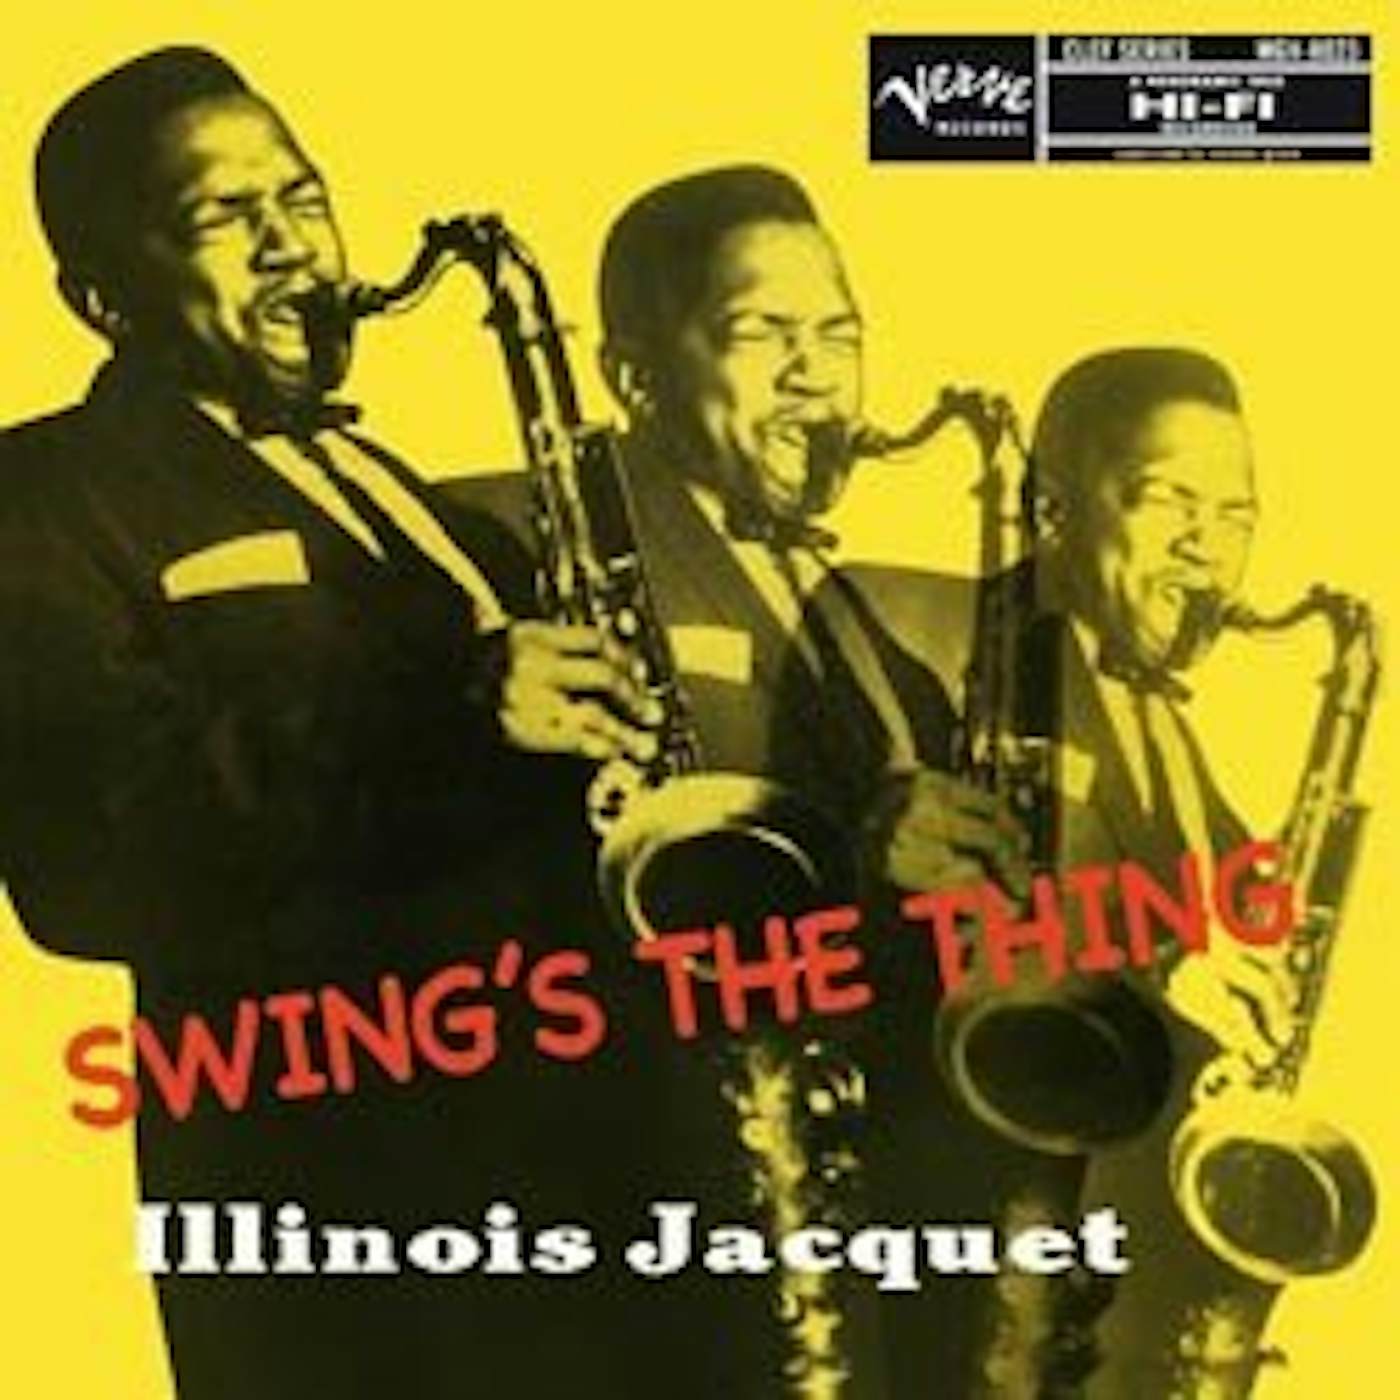 Illinois Jacquet Swing's The Thing Vinyl Record